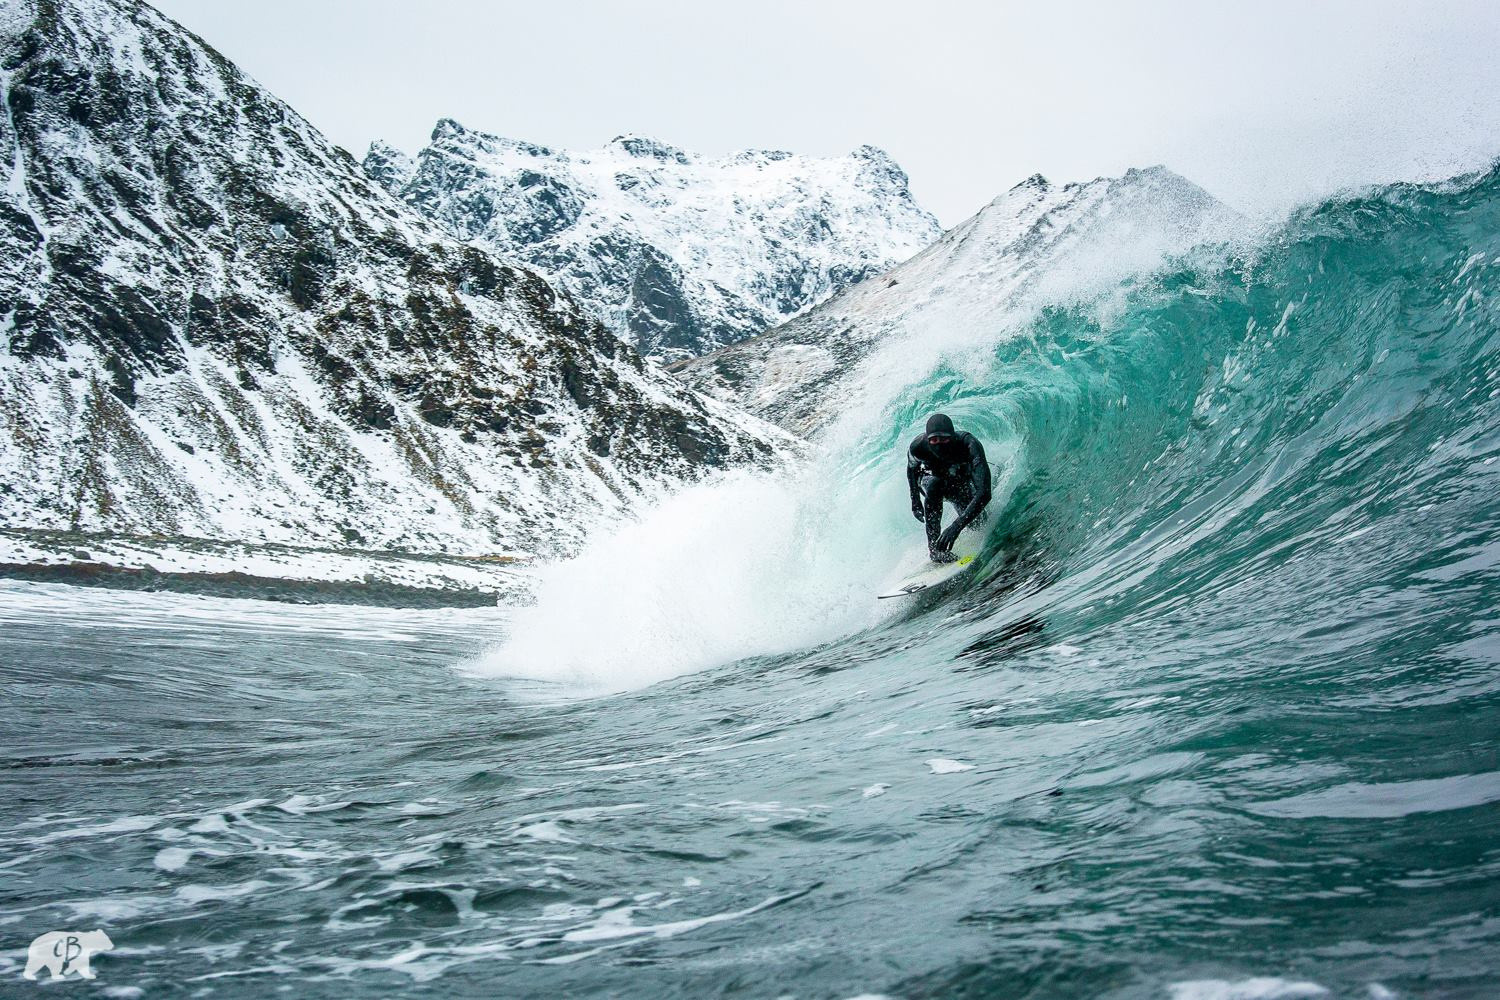 Chris Burkard at TED: The Joy of Arctic Surf Photography